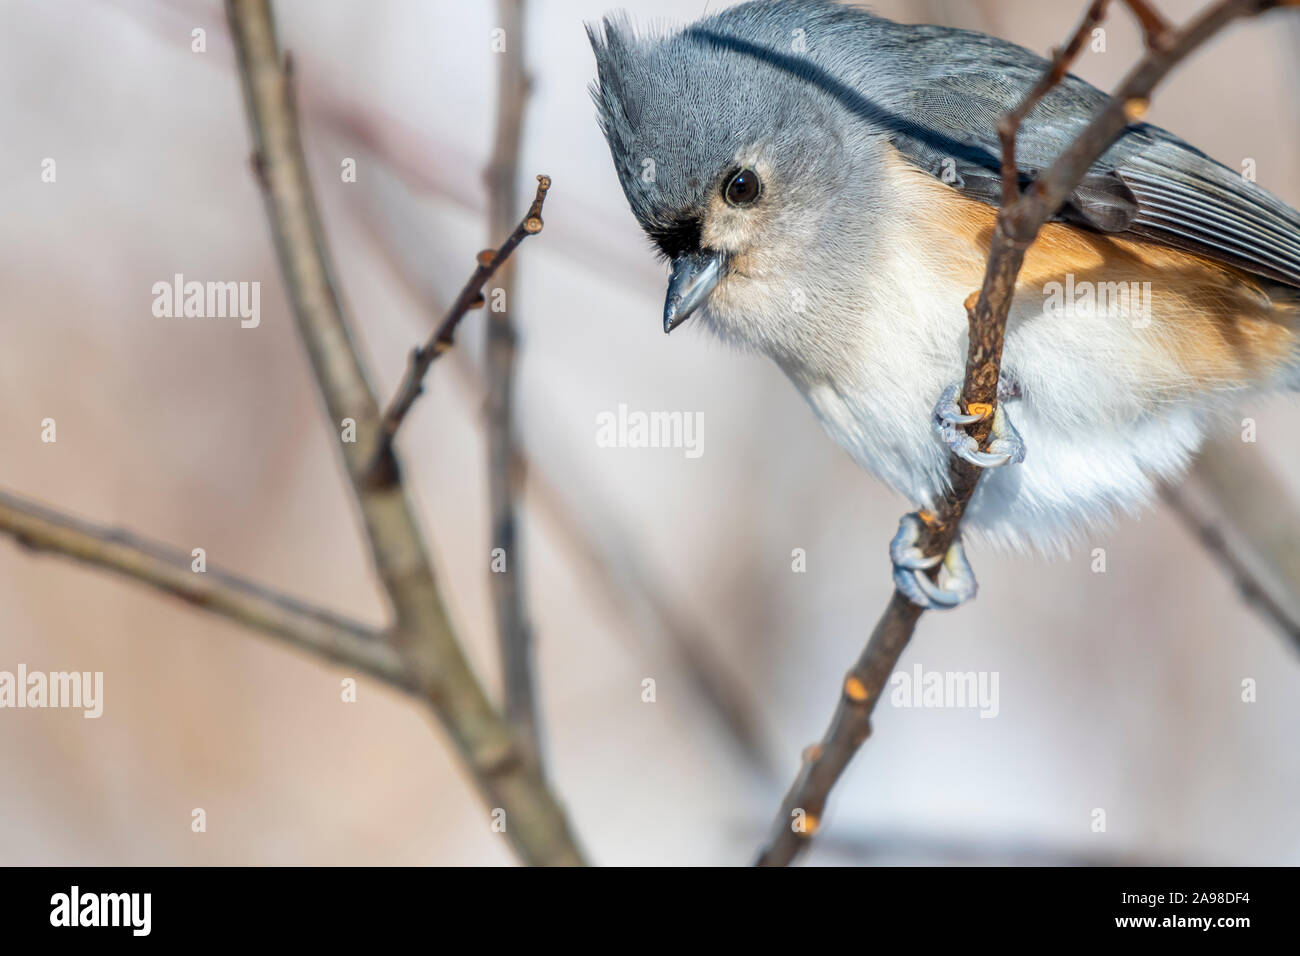 Closeup of a Tufted titmouse (Baeolophus bicolor) perched on a branch in winter. Stock Photo